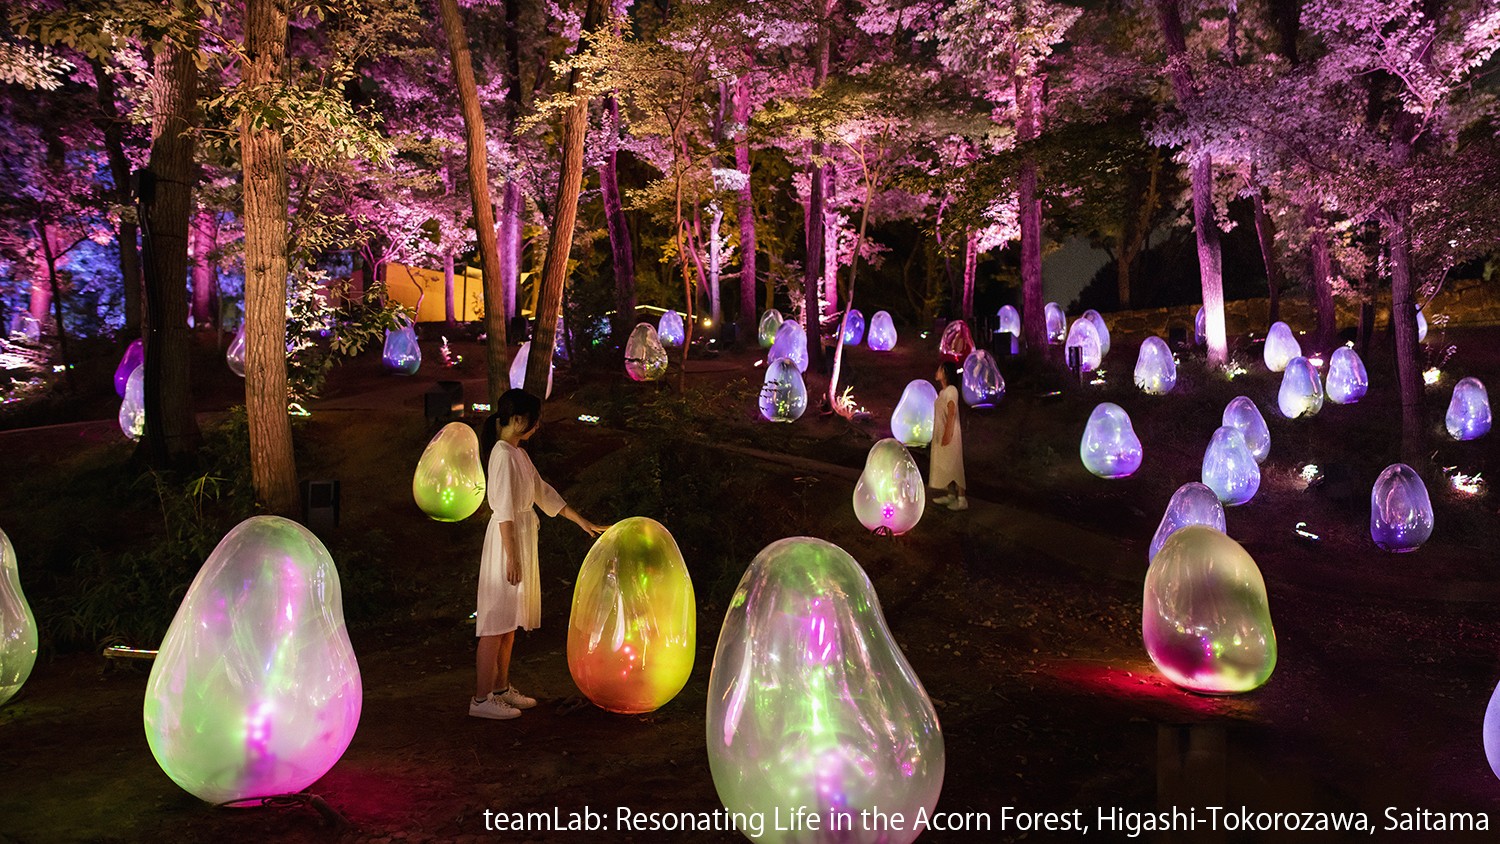 Also recommended: teamLab's new permanent exhibition at Musashino Woods Park